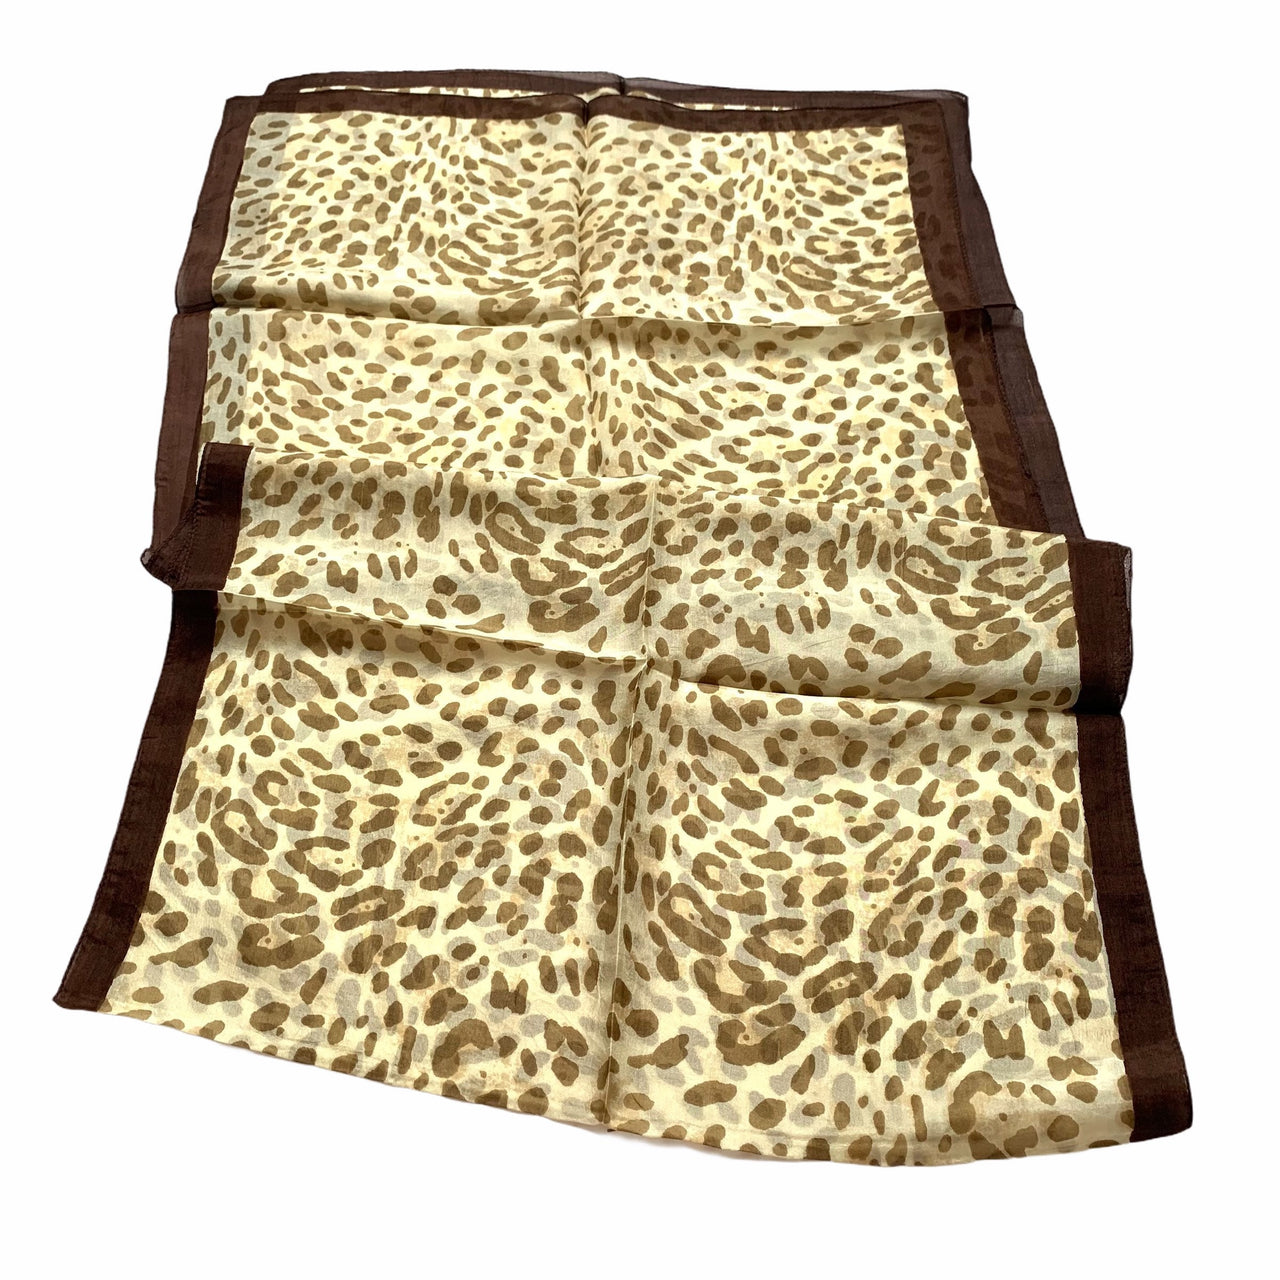 Leopard Print  Silk Beige and Caramel with Brown Reversible Leopard Print Scarf Stole Neck Scarf